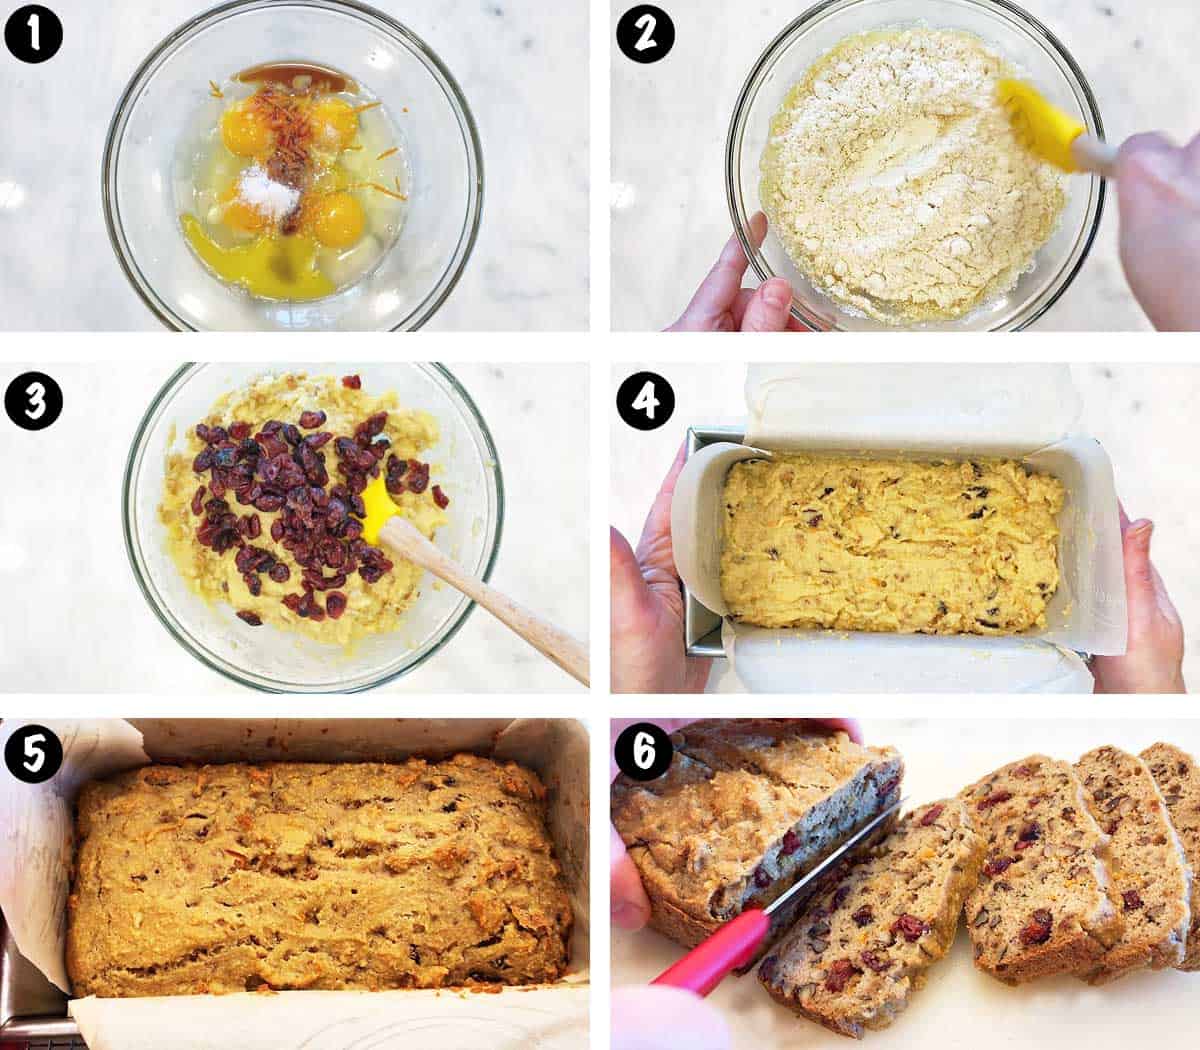 A six-photo collage showing the steps for baking a low-carb fruitcake. 